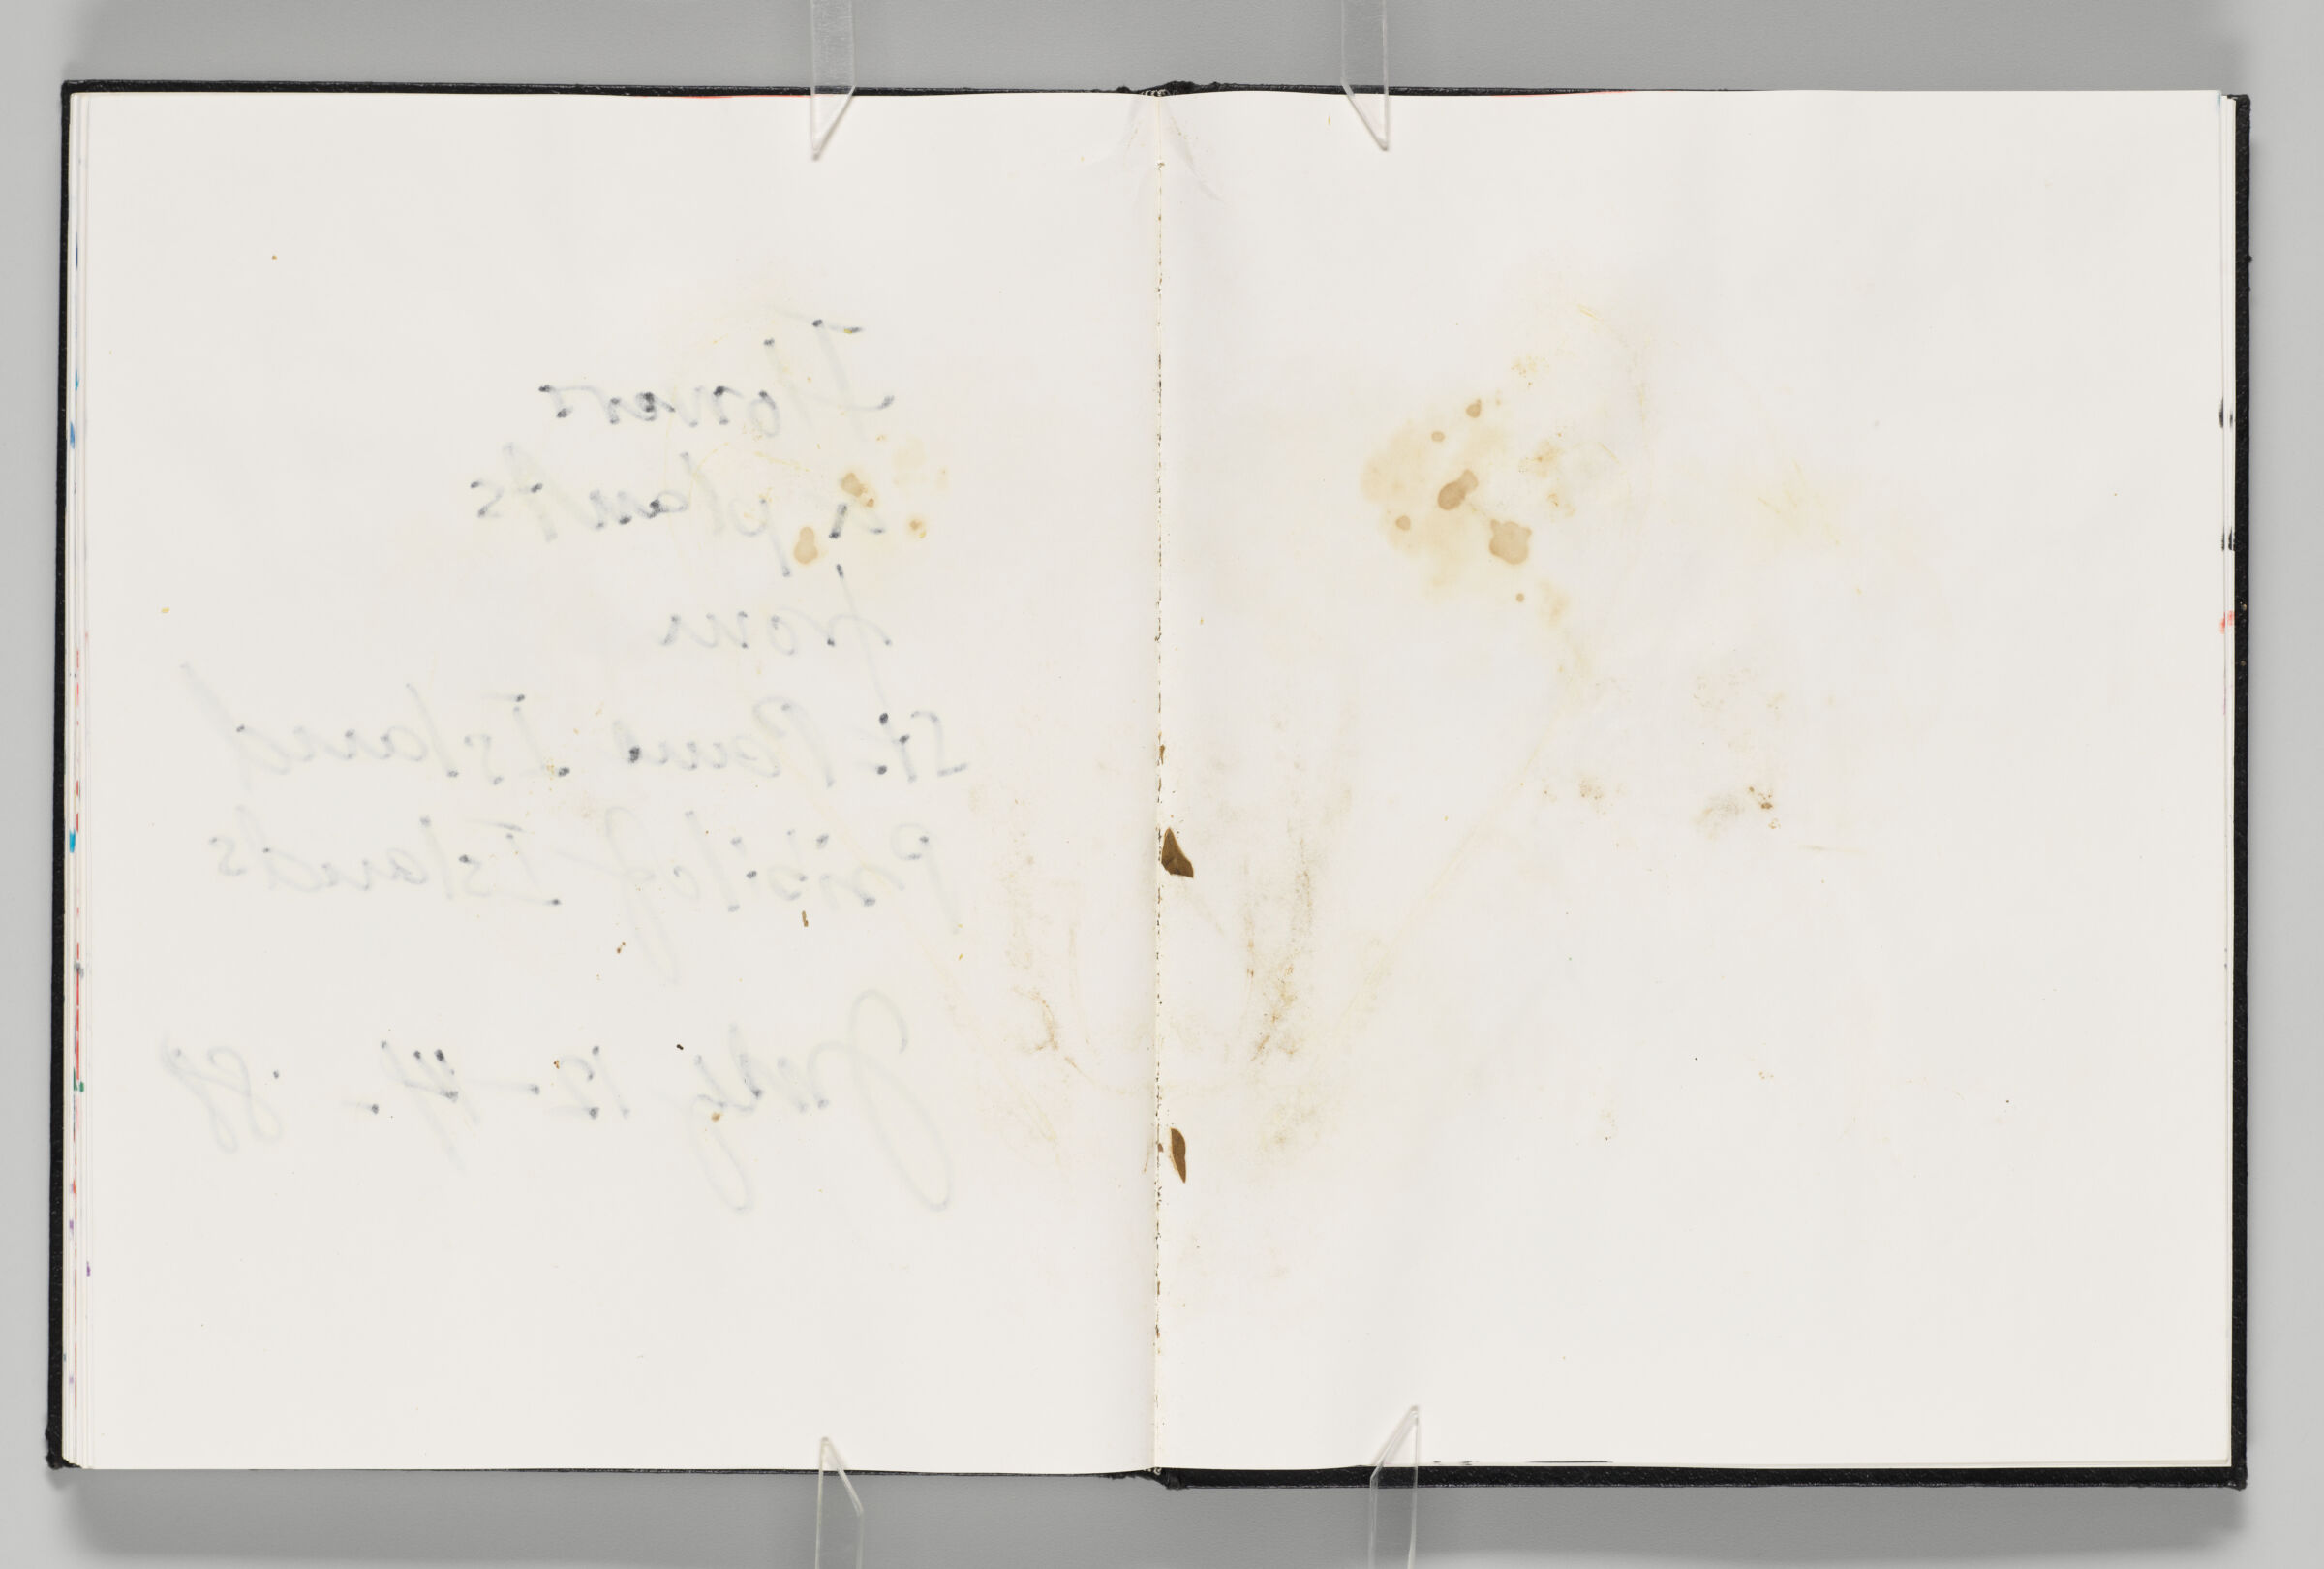 Untitled (Blank With Flower Stains And Traces, Left Page); Untitled (Blank With Flower Stains And Traces, Right Page)